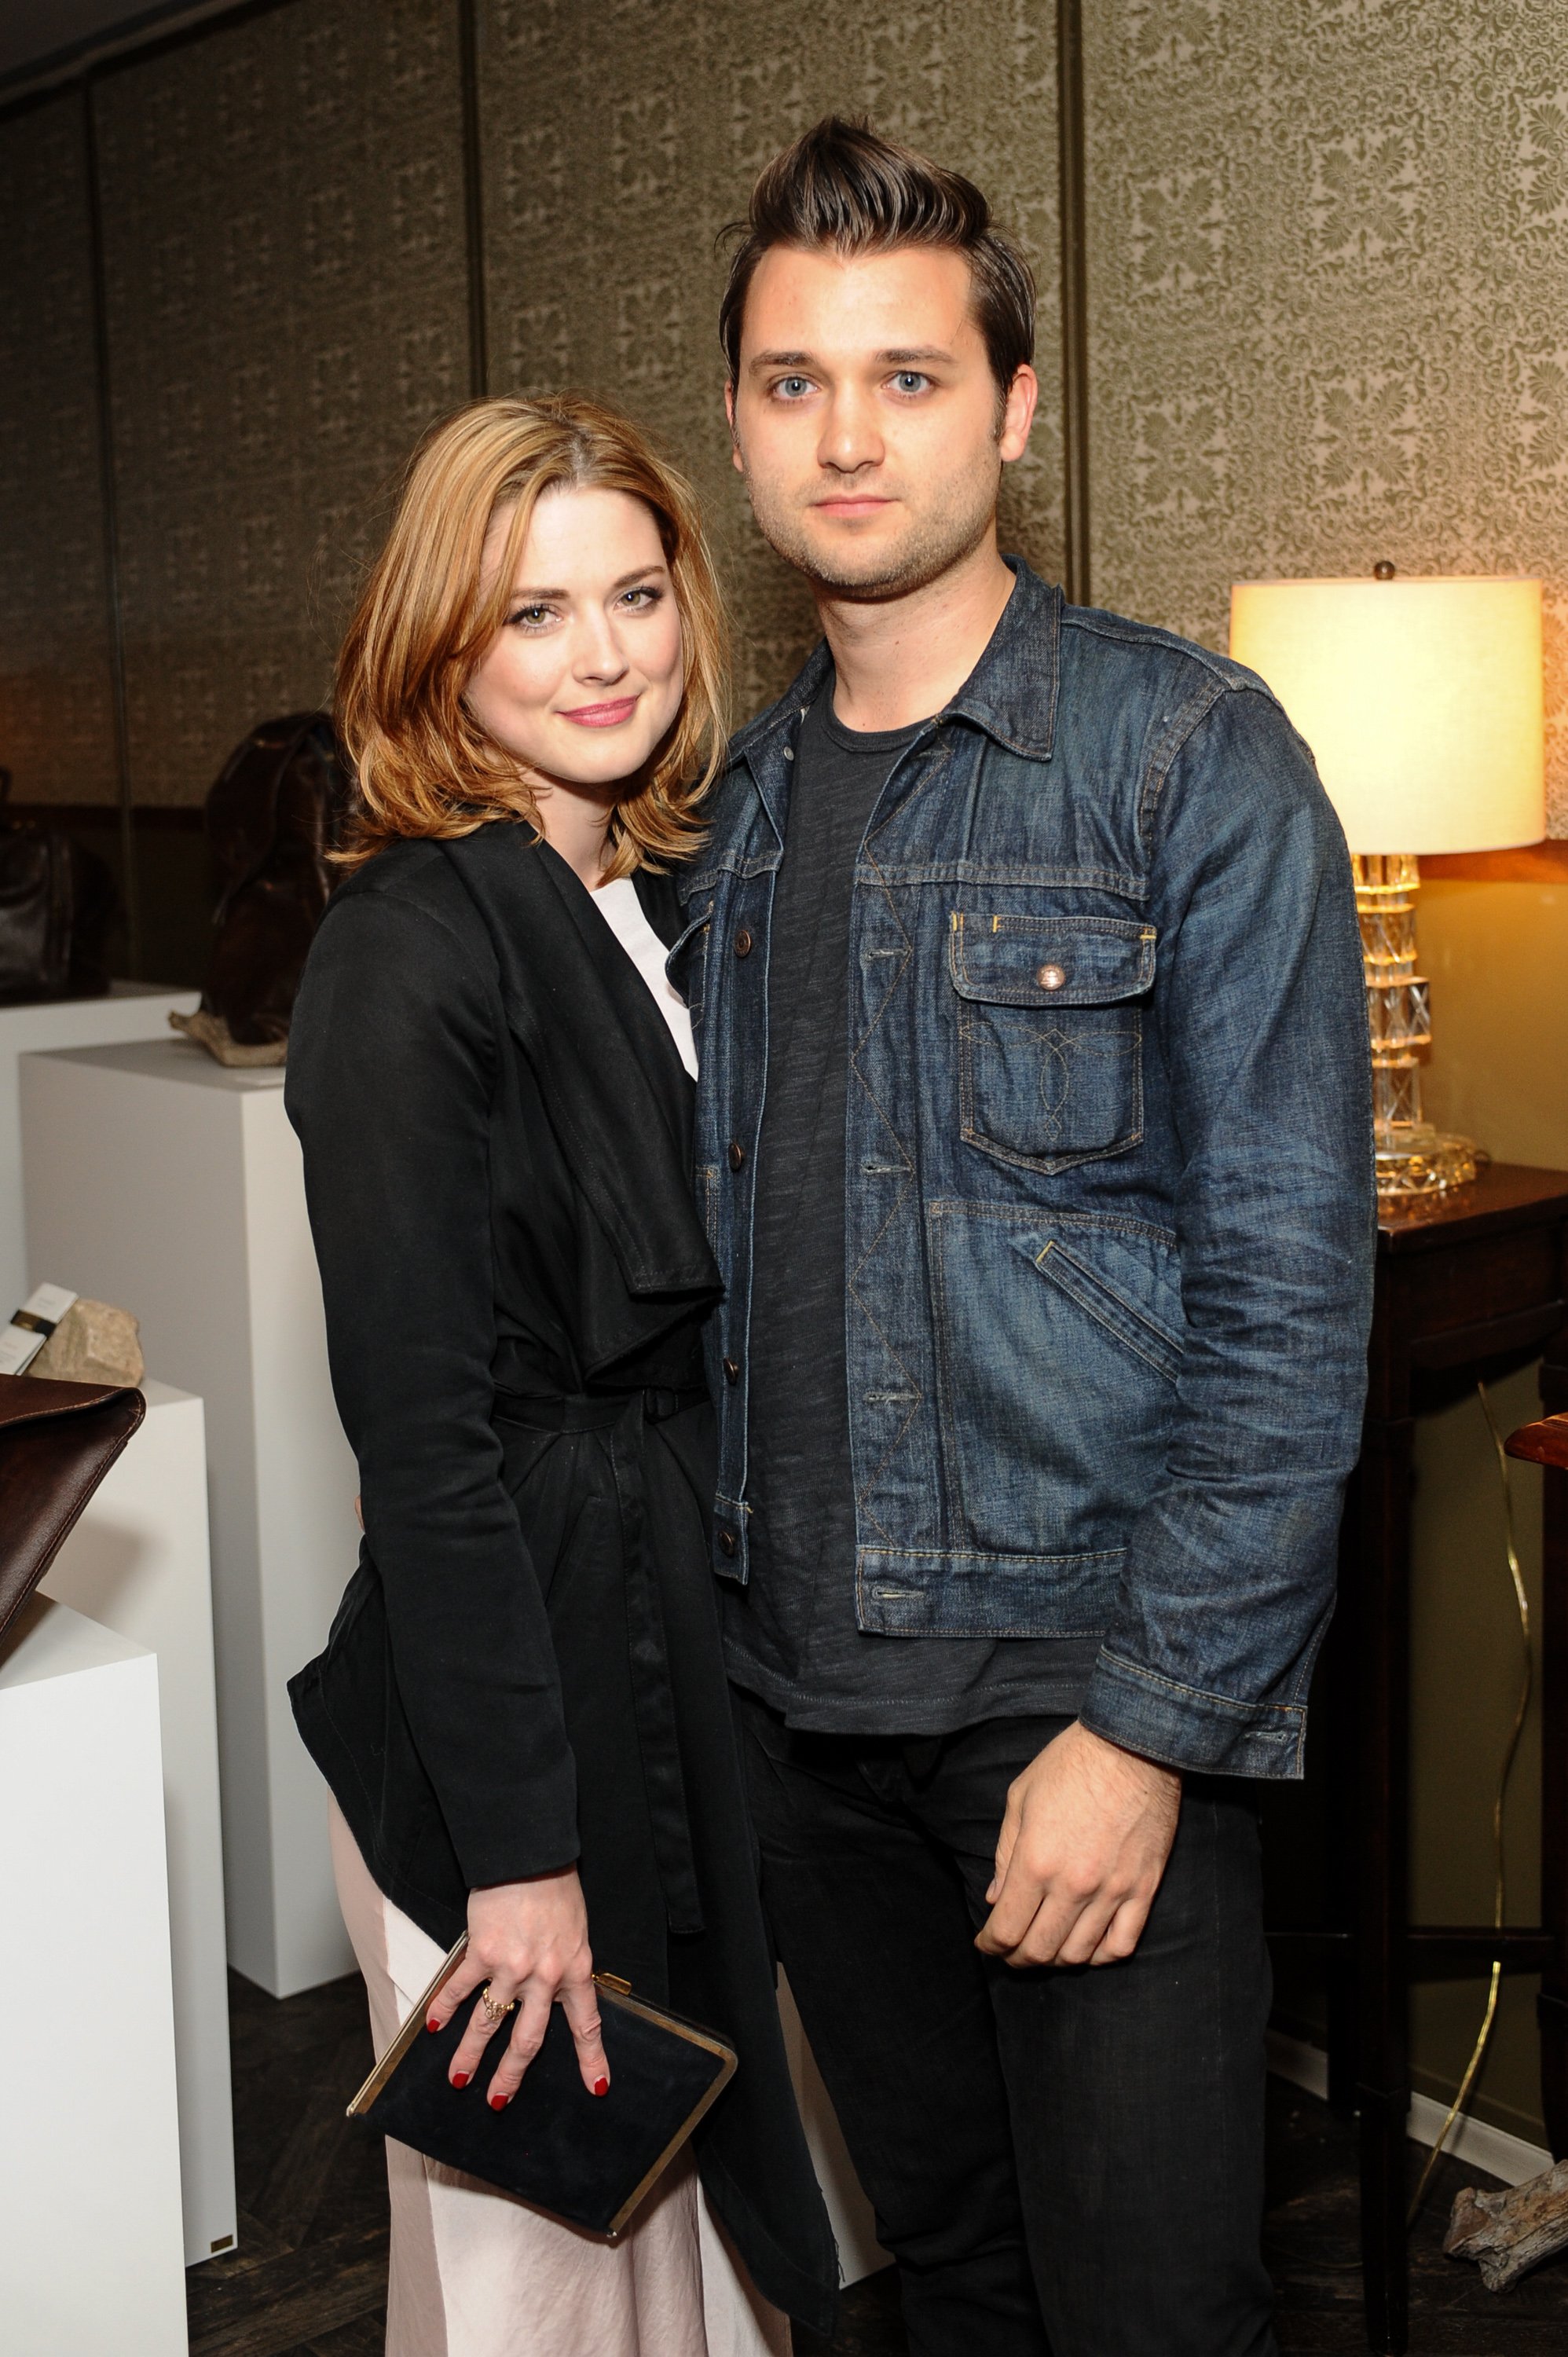 Alexandra Breckenridge and Casey Hooper attend REVISIT Launch Party on April 3, 2014 in Los Angeles, California. | Source: Getty Images